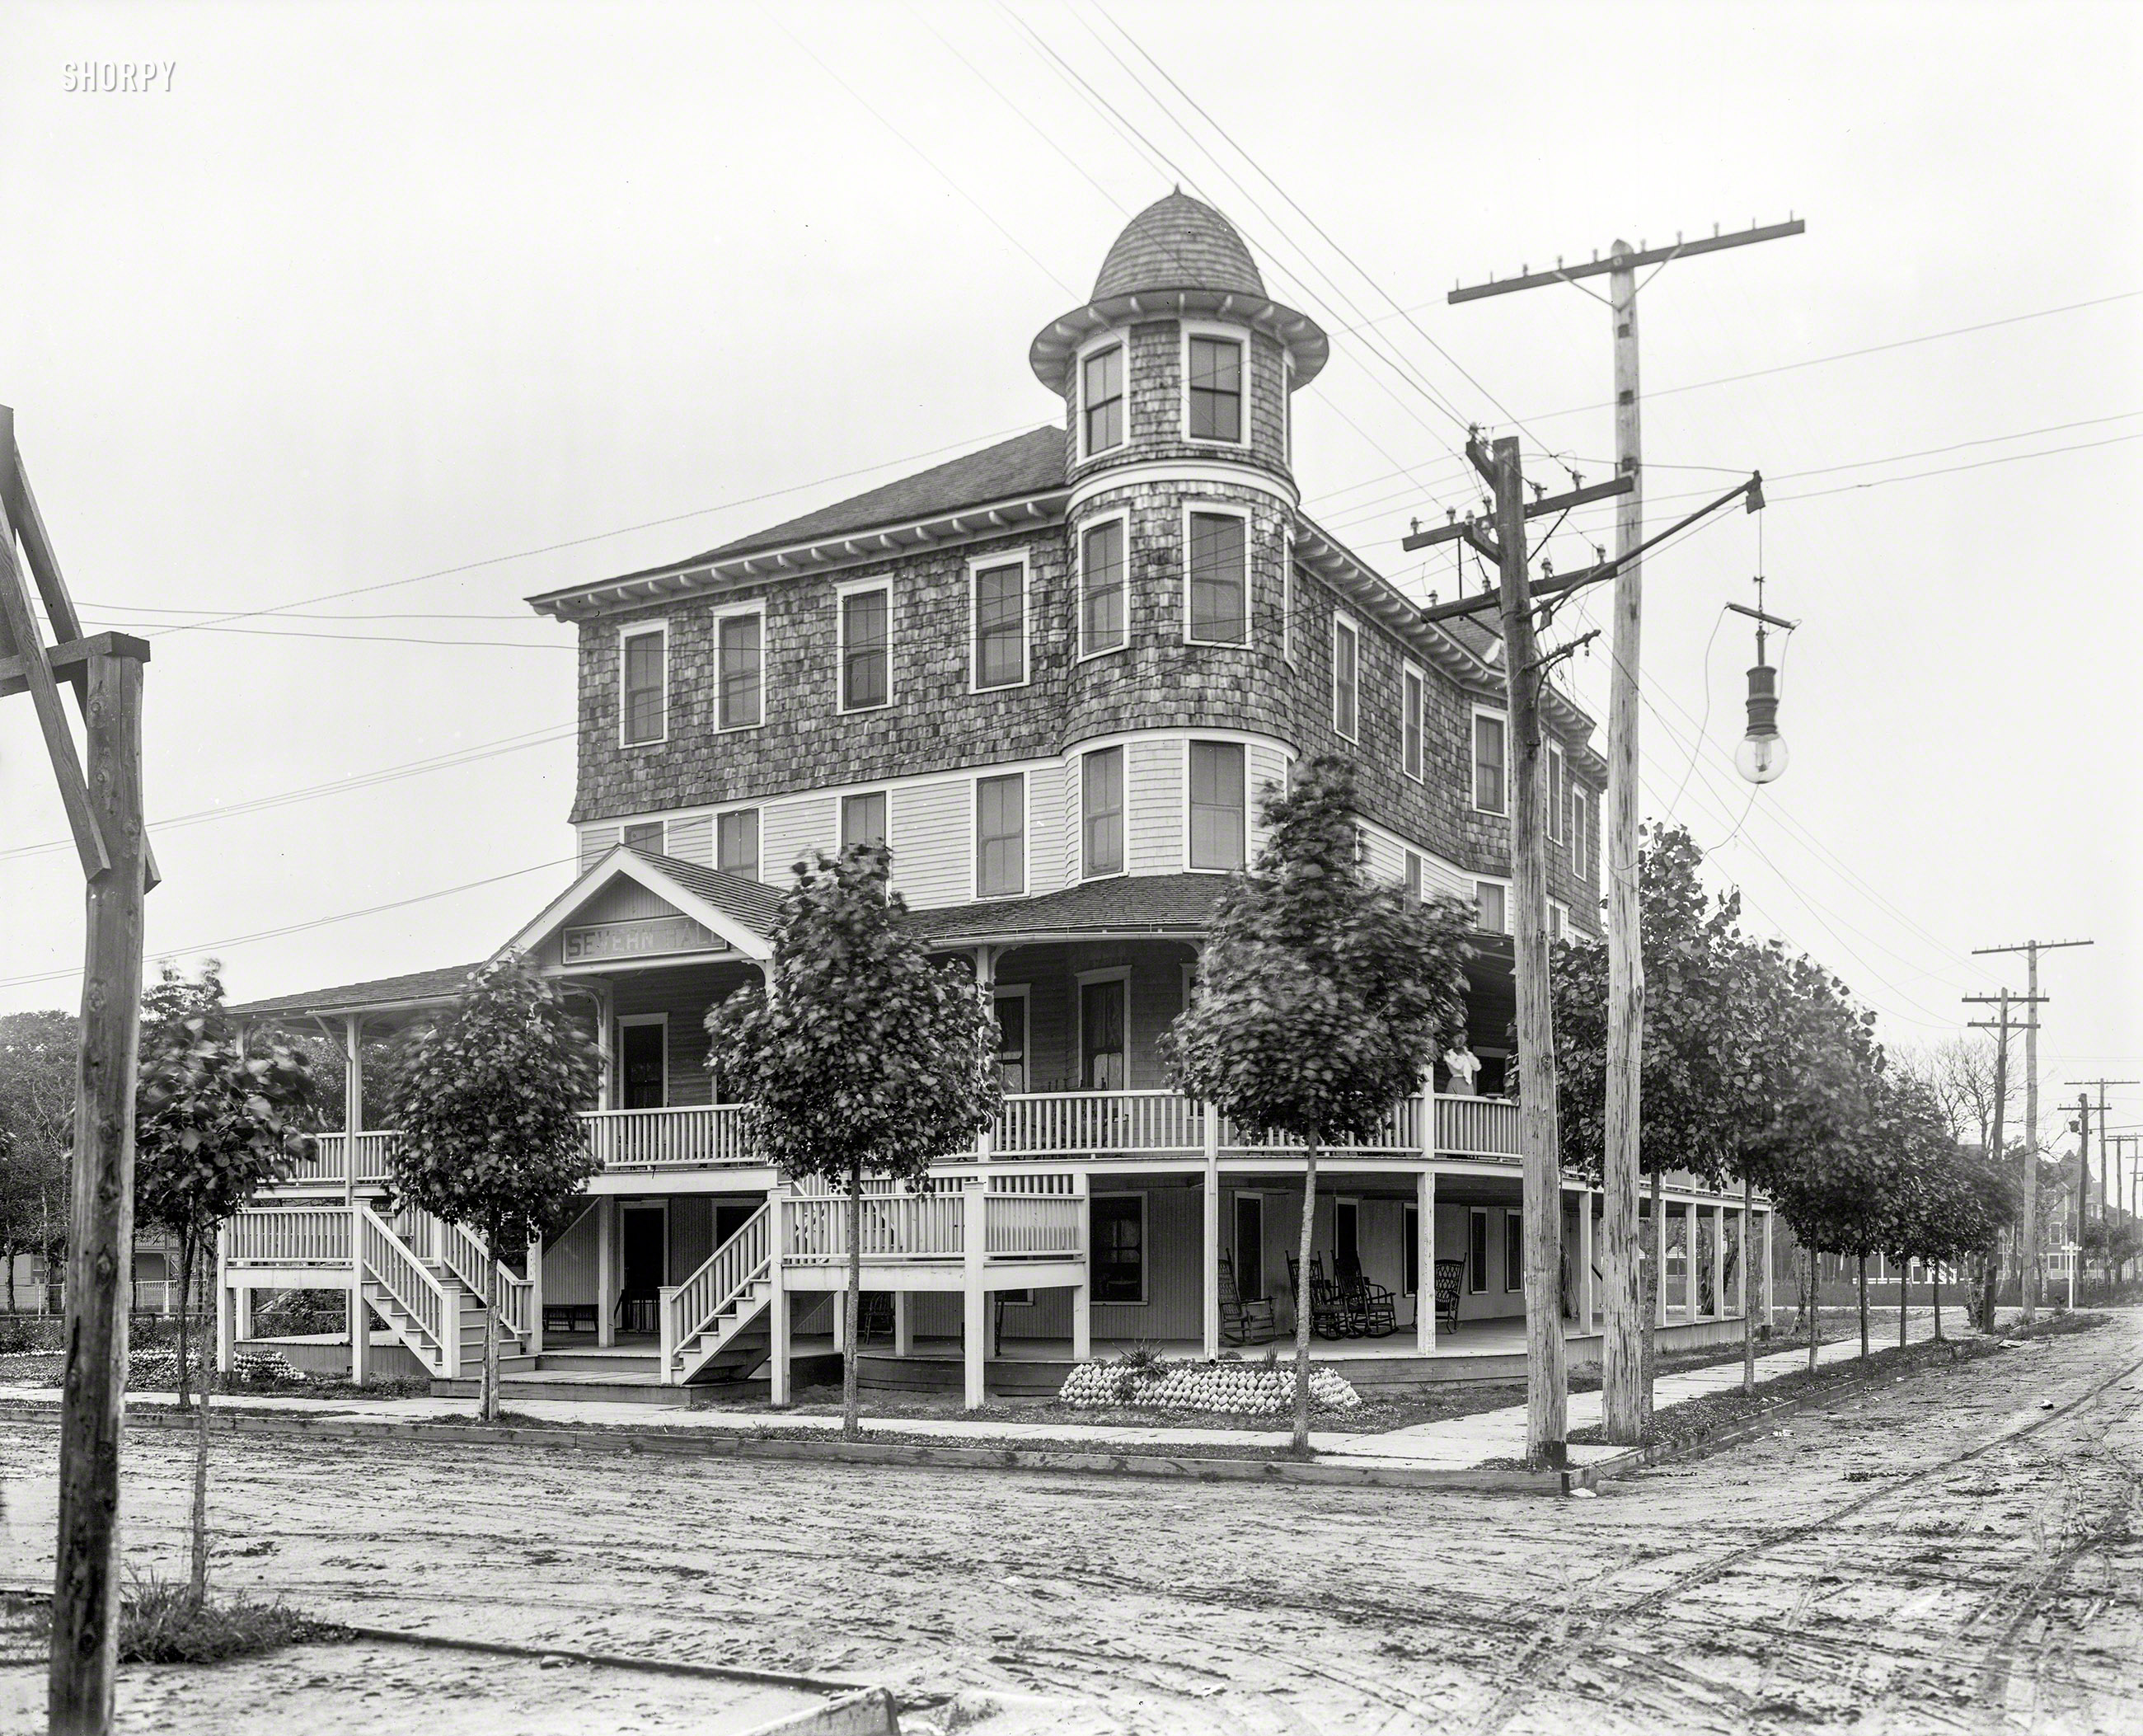 Circa 1907. "Severn Hall." A hotel in Wildwood, New Jersey. 8x10 inch dry plate glass negative, Detroit Publishing Company. View full size.